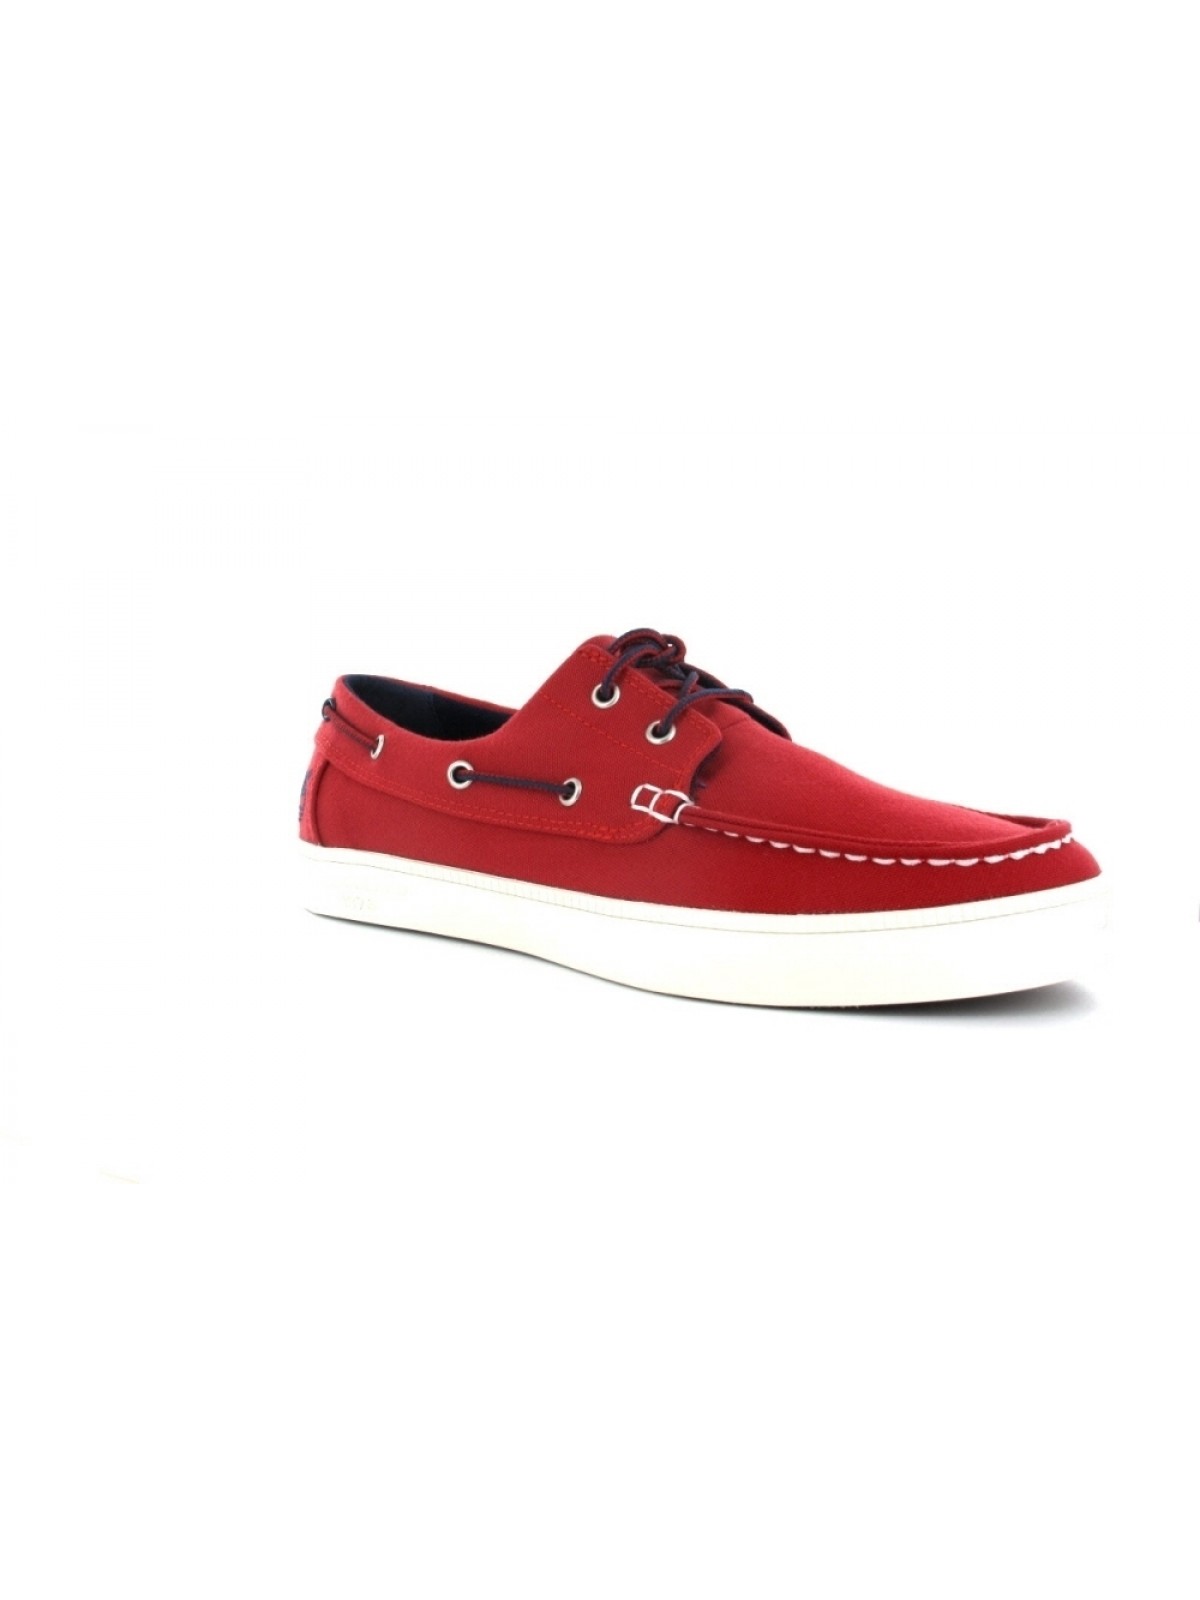 Timberland Newport canvas red